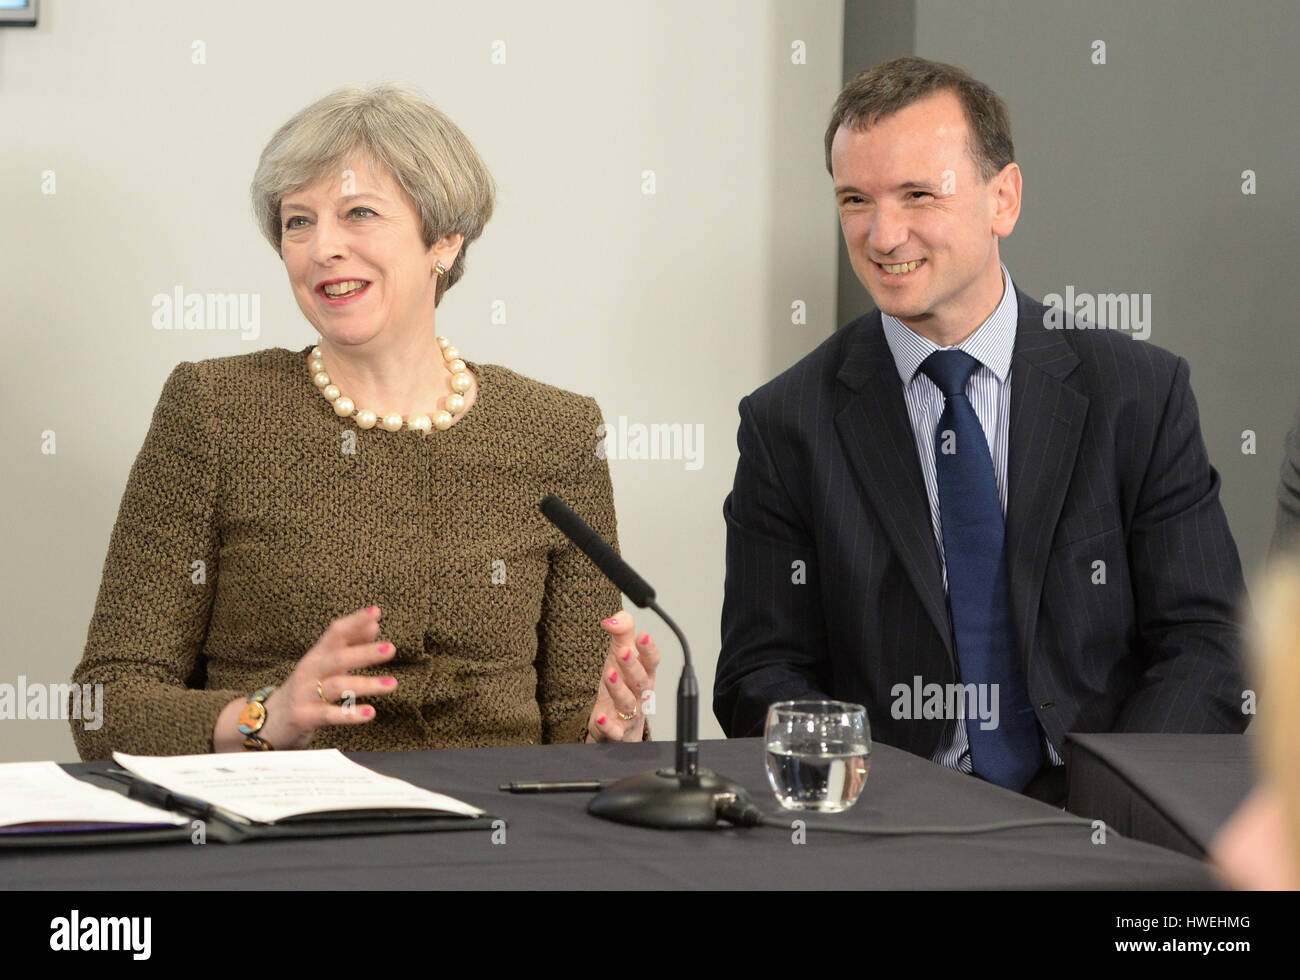 ALTERNATE CROP Prime Minister Theresa May (left) and Welsh Secretary Alun Caurns during a meeting at the Liberty Stadium in Swansea, as she faces pressure to keep the union together in the wake of the divisive Brexit vote. Stock Photo